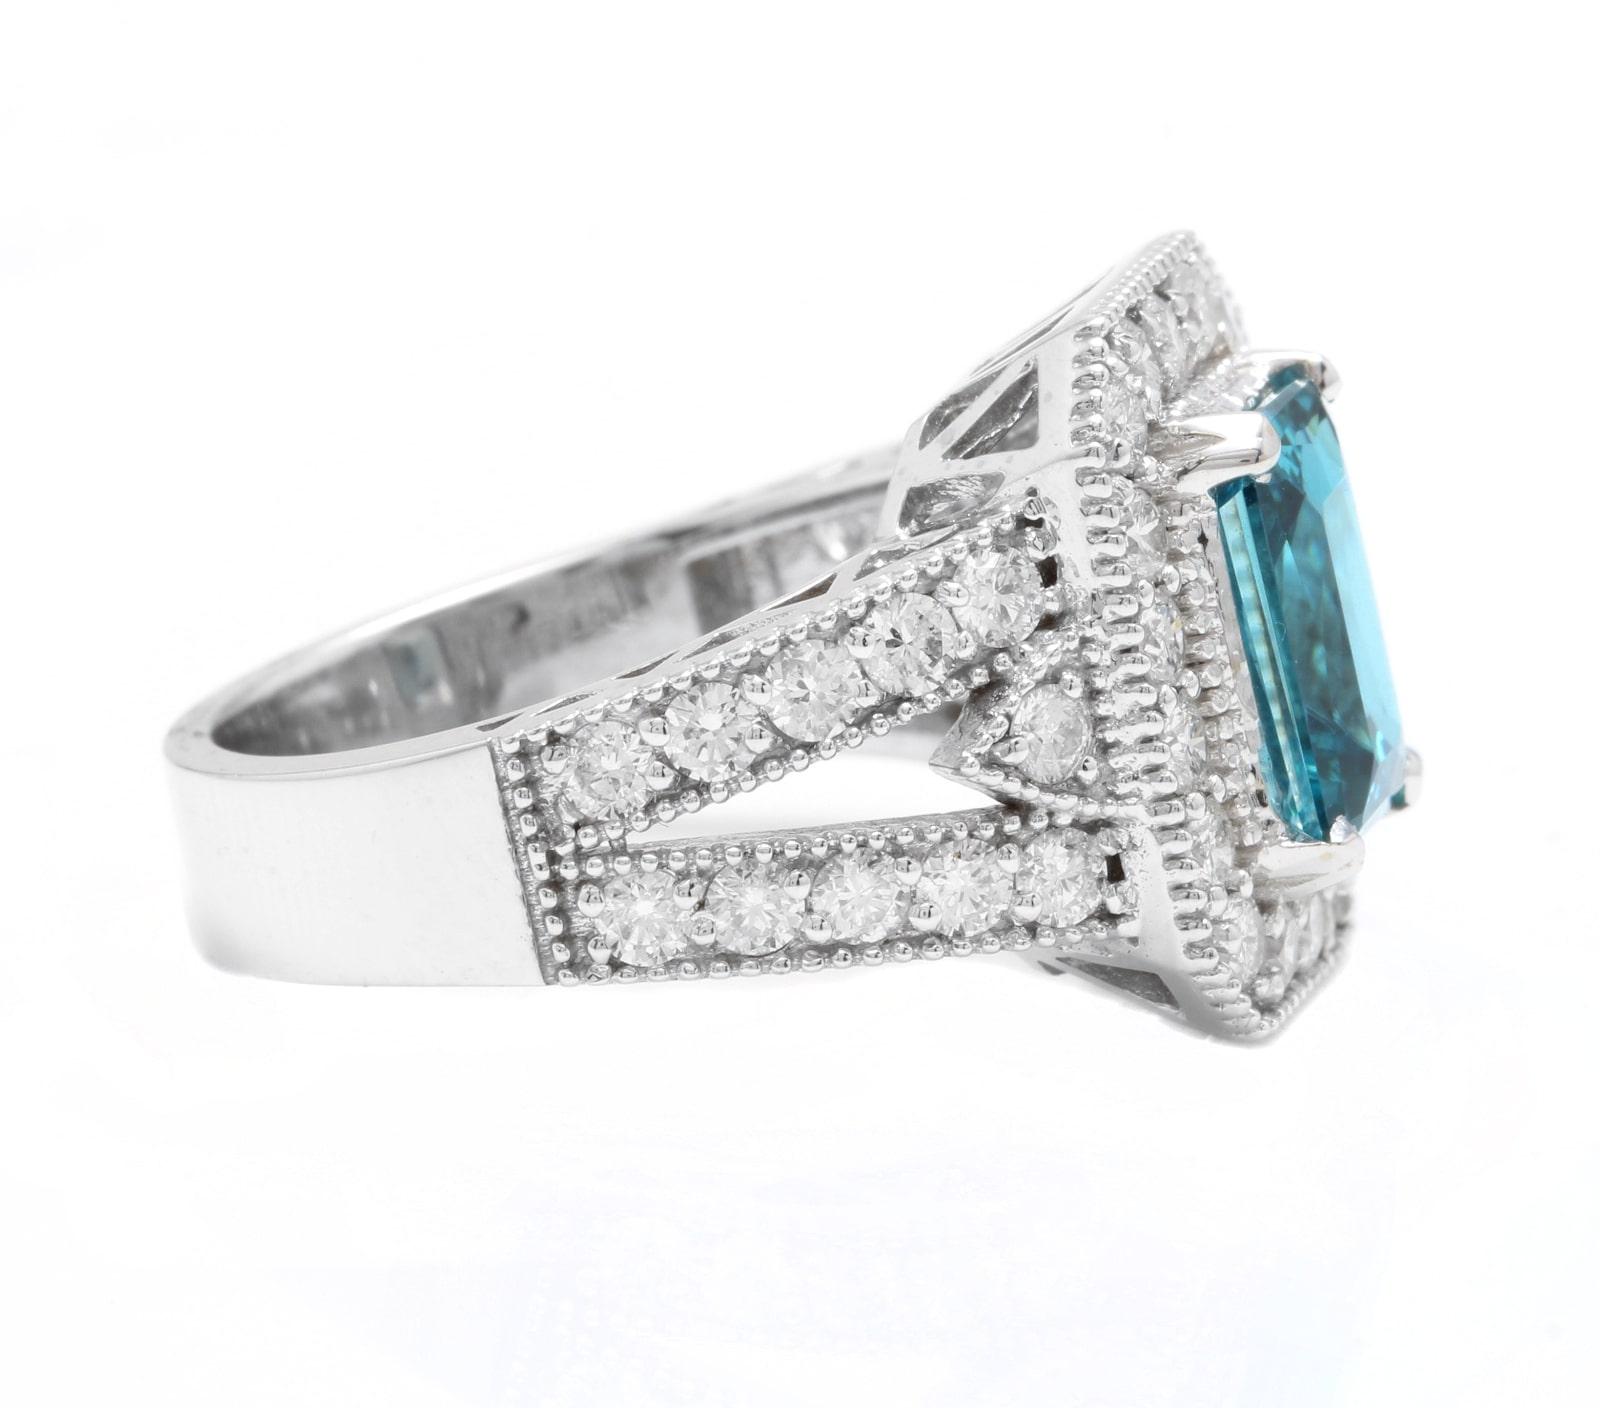 Mixed Cut 5.95 Ct Natural Nice Looking Blue Zircon and Diamond 14K Solid White Gold Ring For Sale